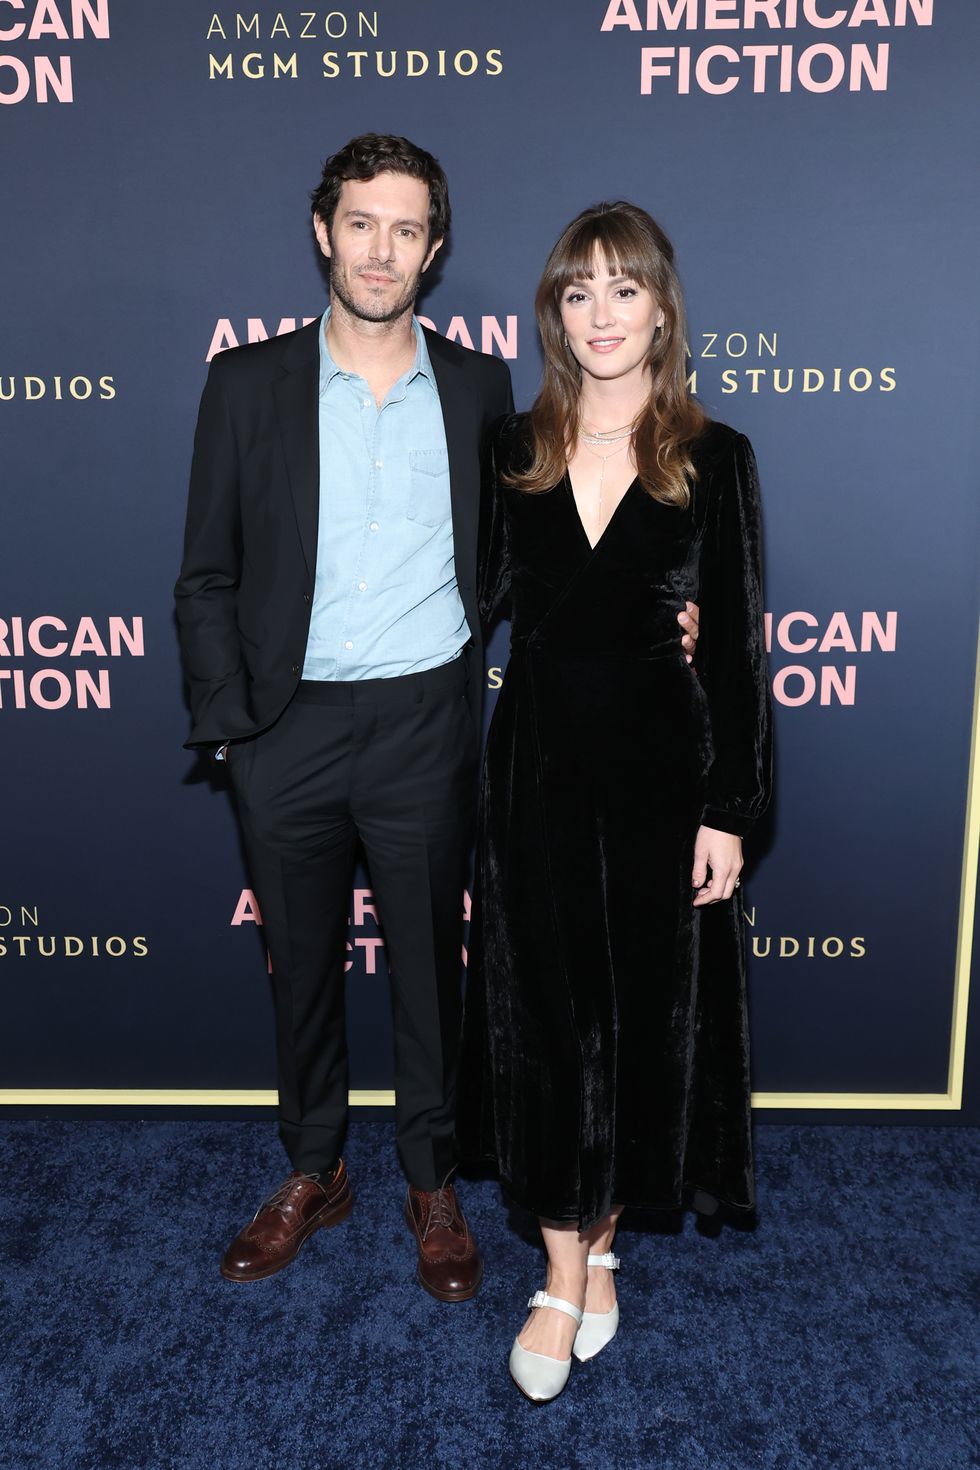 beverly hills, california december 05 l r adam brody and leighton meester attend the los angeles special screening of amazon and mgm studios american fiction at samuel goldwyn theater on december 05, 2023 in beverly hills, california photo by amy sussmangetty images